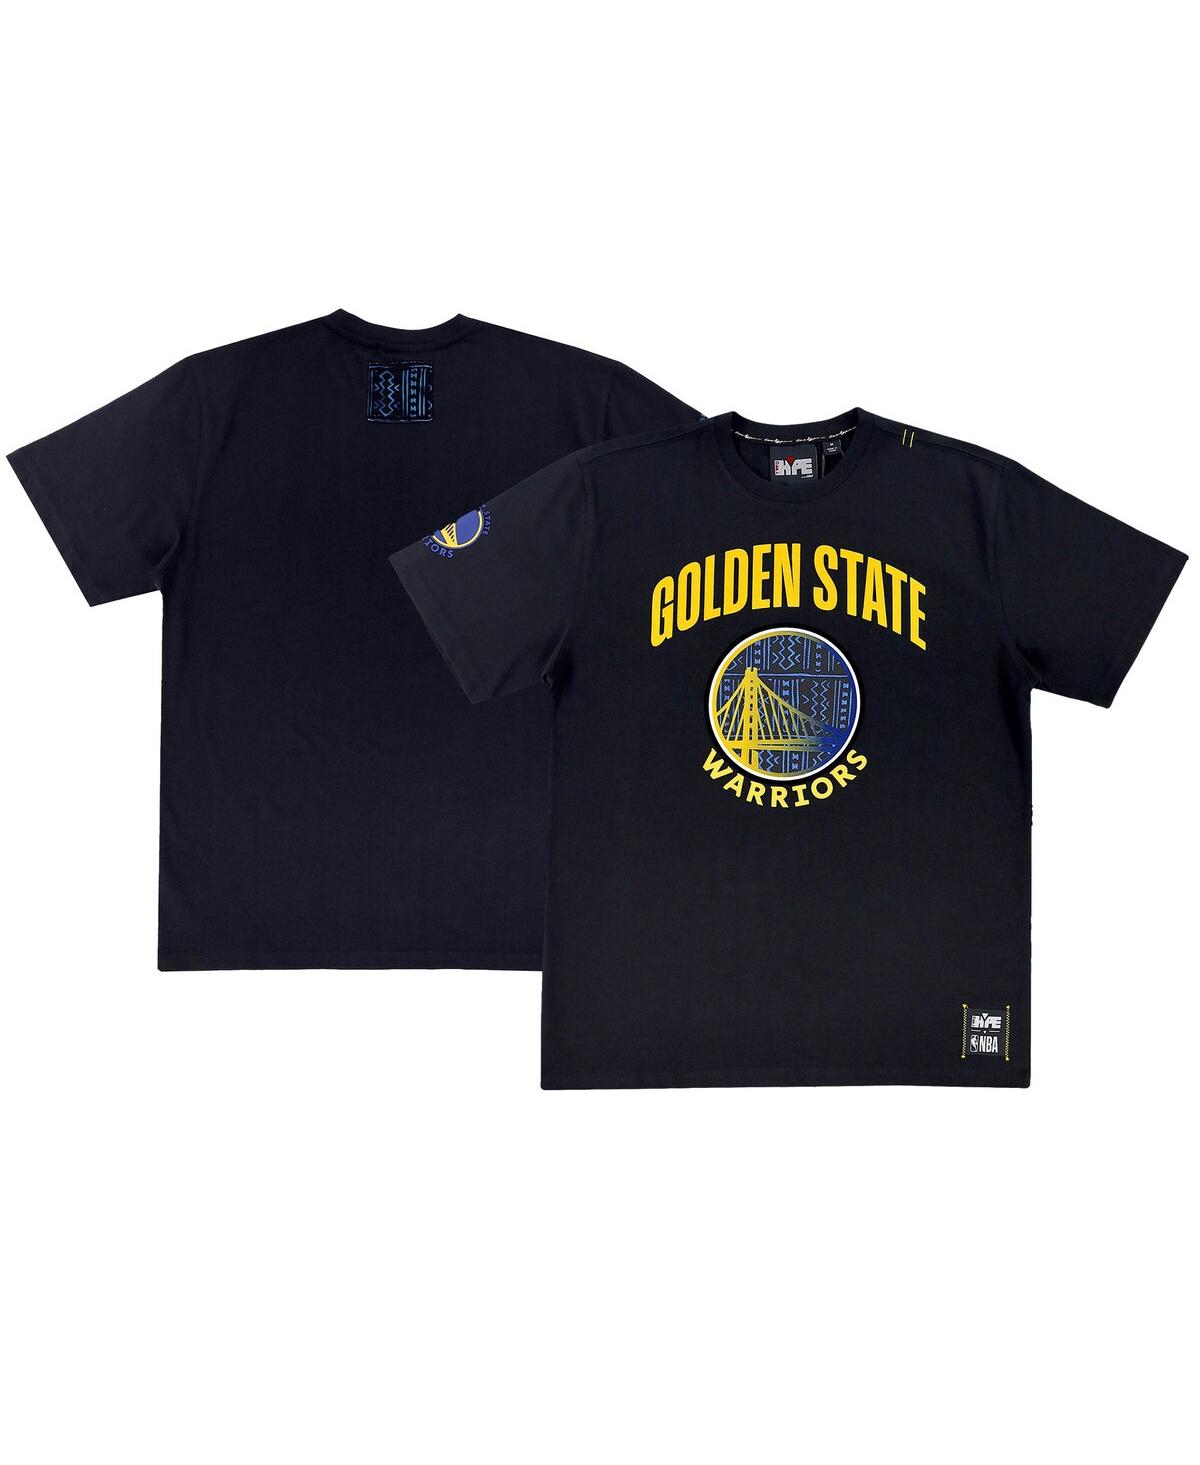 Men's and Women's Nba x Two Hype Black Golden State Warriors Culture & Hoops T-shirt - Black